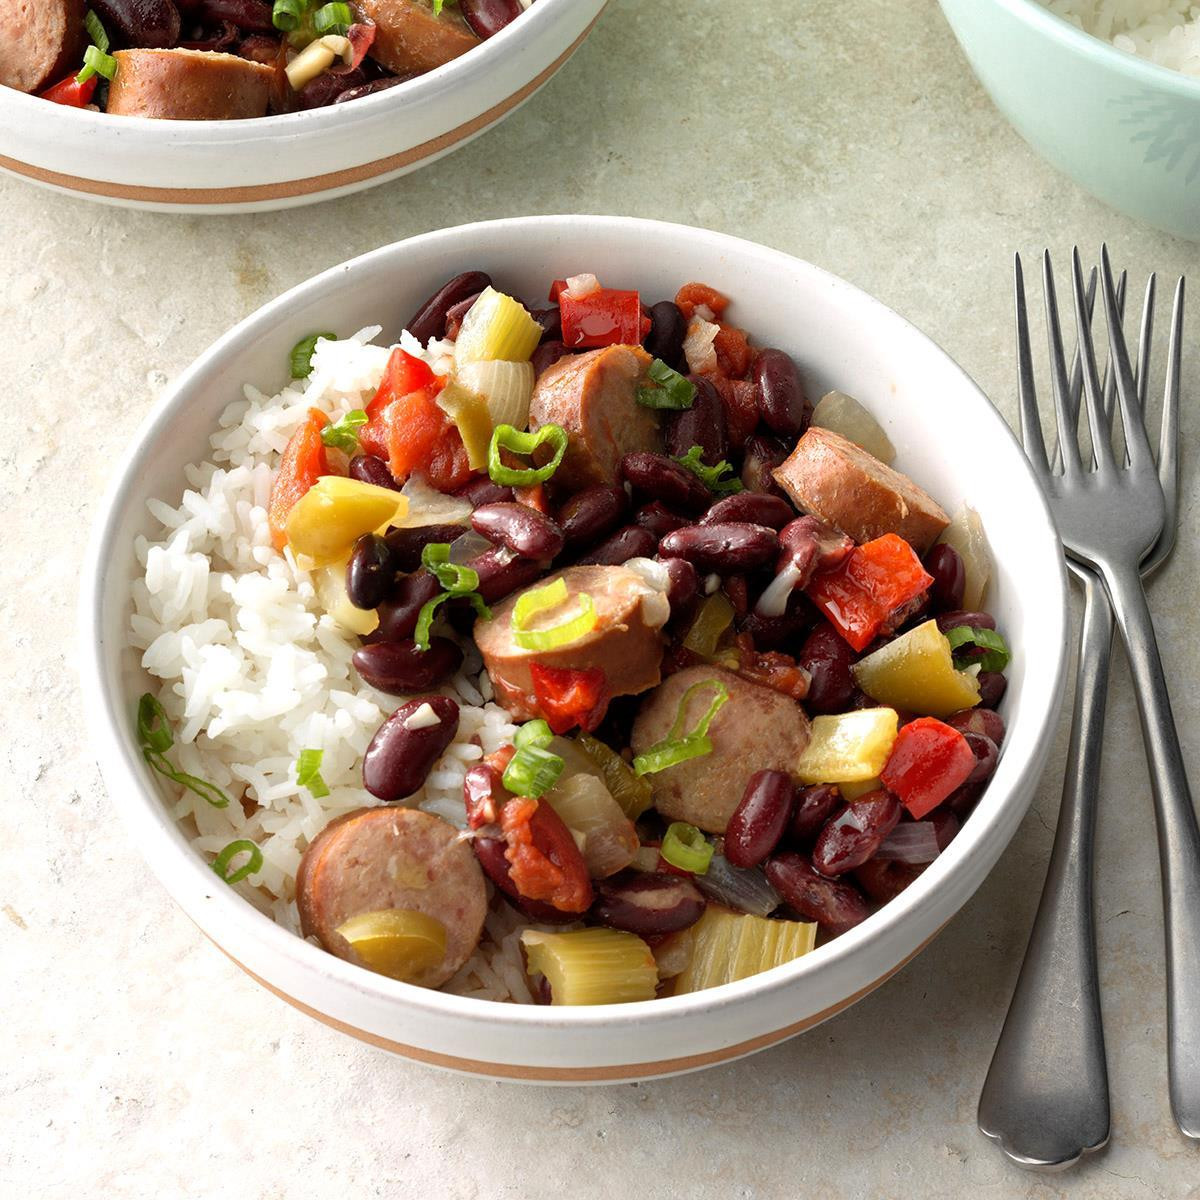 Louisiana Red Beans And Rice
 Louisiana Red Beans and Rice Recipe